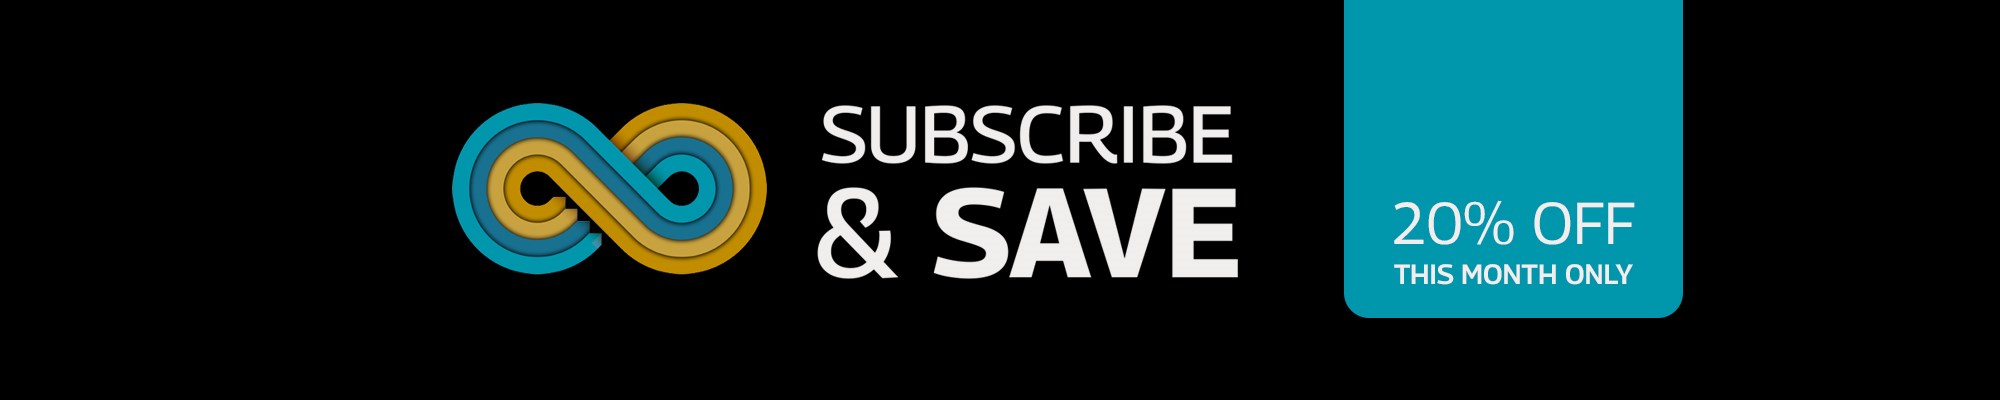 Subscribe and Save. 20% off. This month only. 